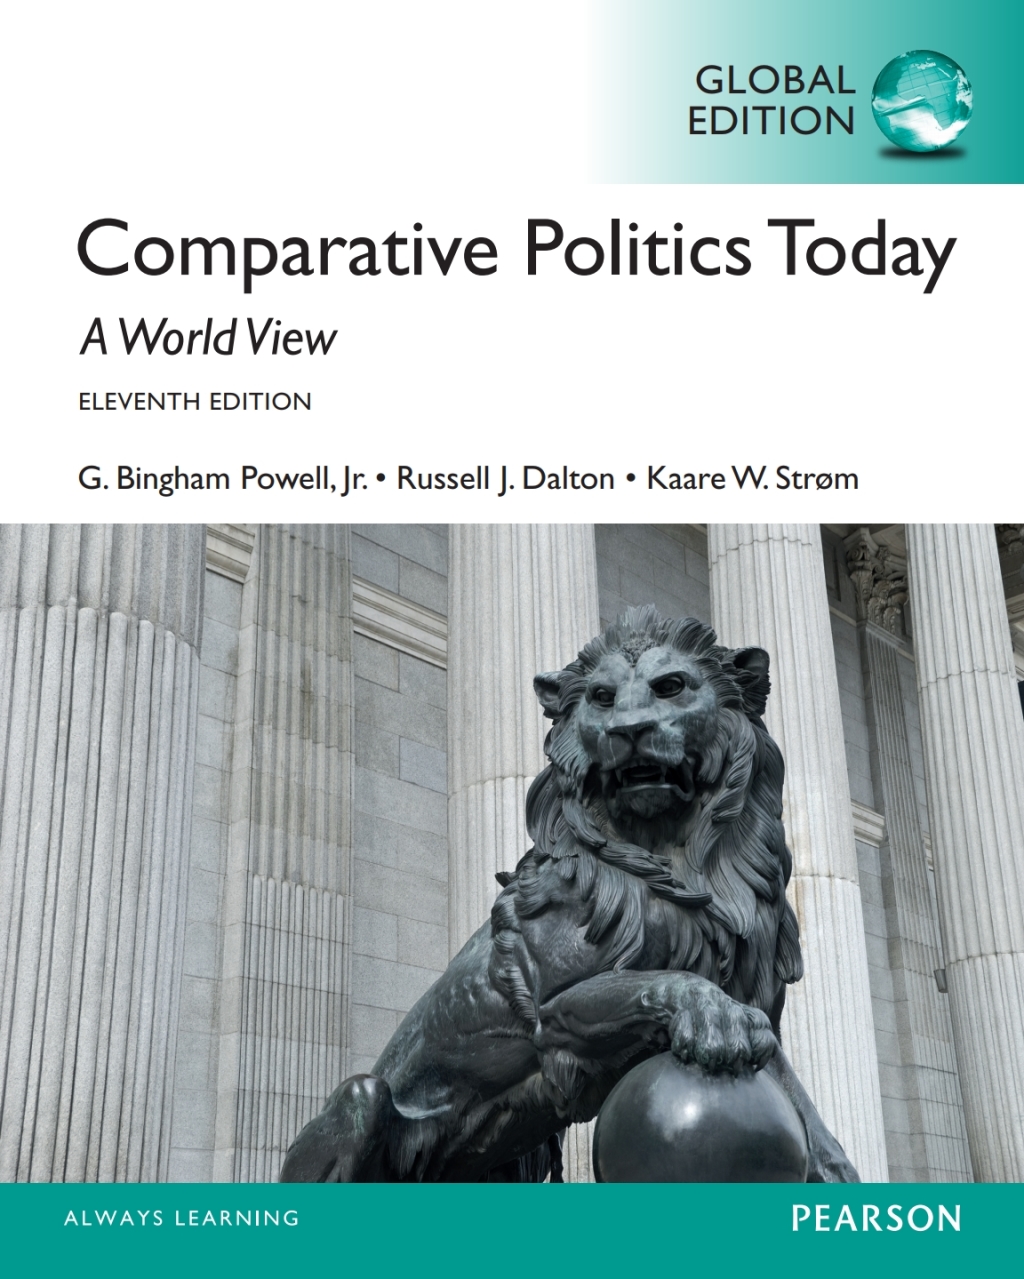 Comparative Politics Today: A World View PDF eBook  Global Edition - 11th Edition (eBook Rental)